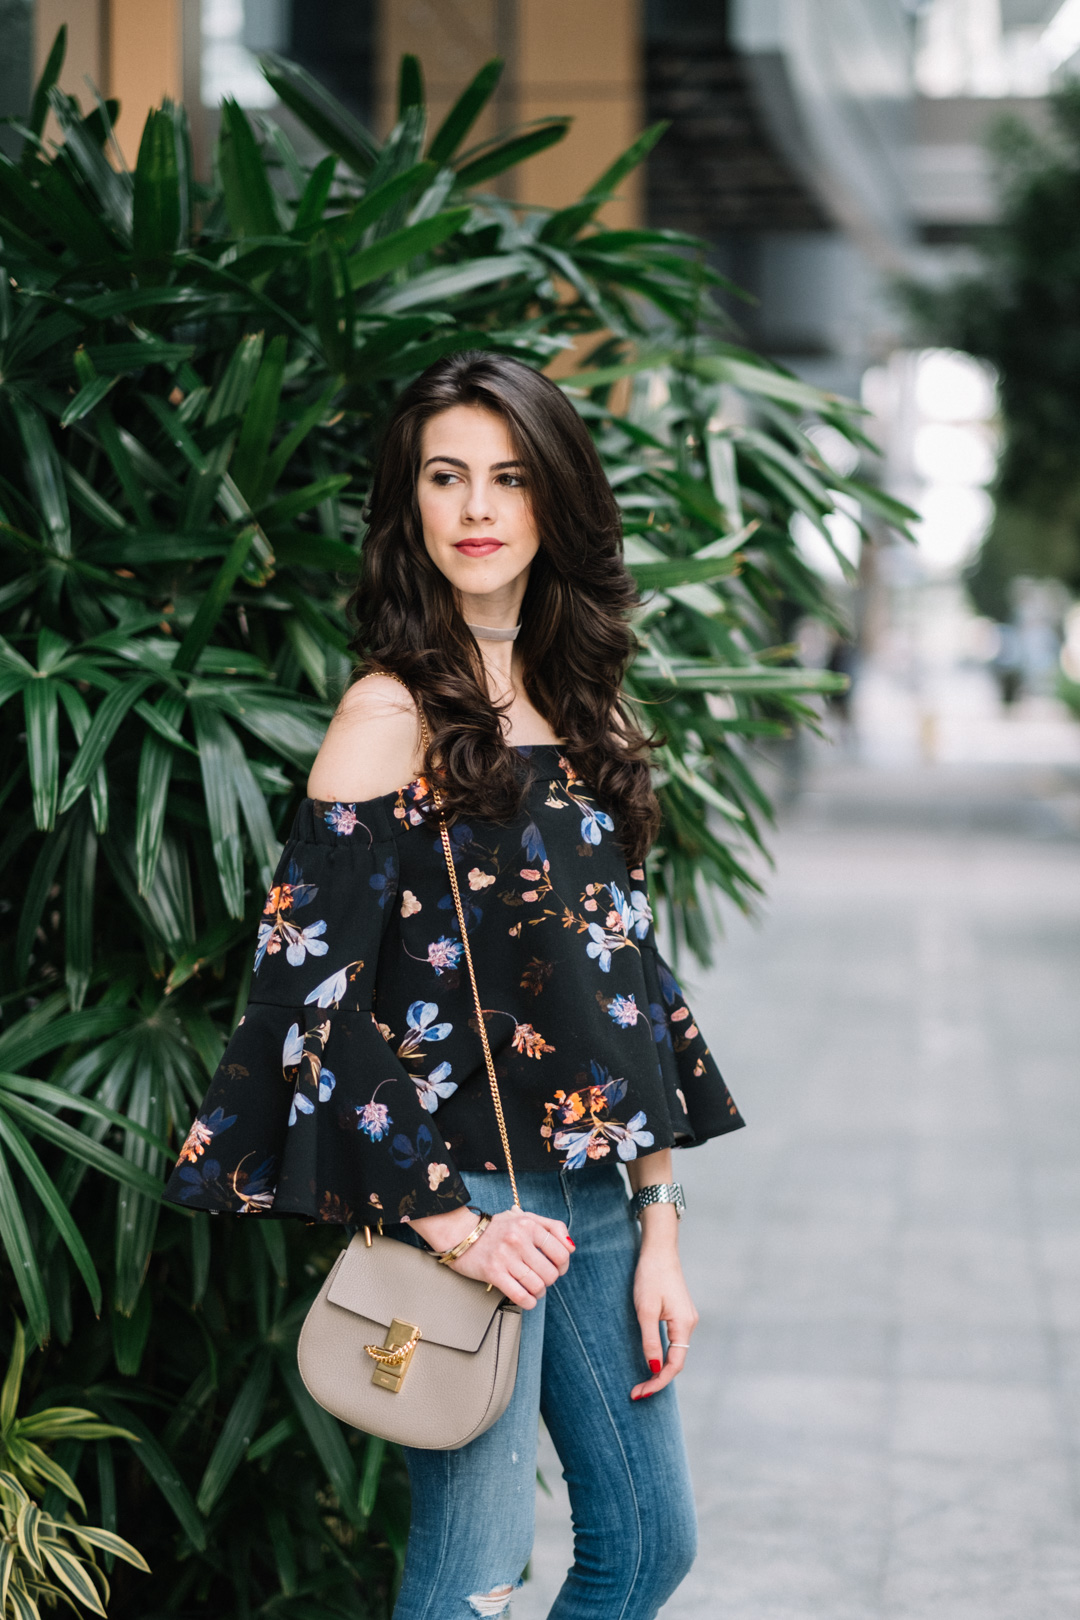 Jackie Roque styling a Toyshop off-the-shoulder floral top, with J Brand Alana ripped jeans, Chloe Drew bag and Joie Pippi shoes.